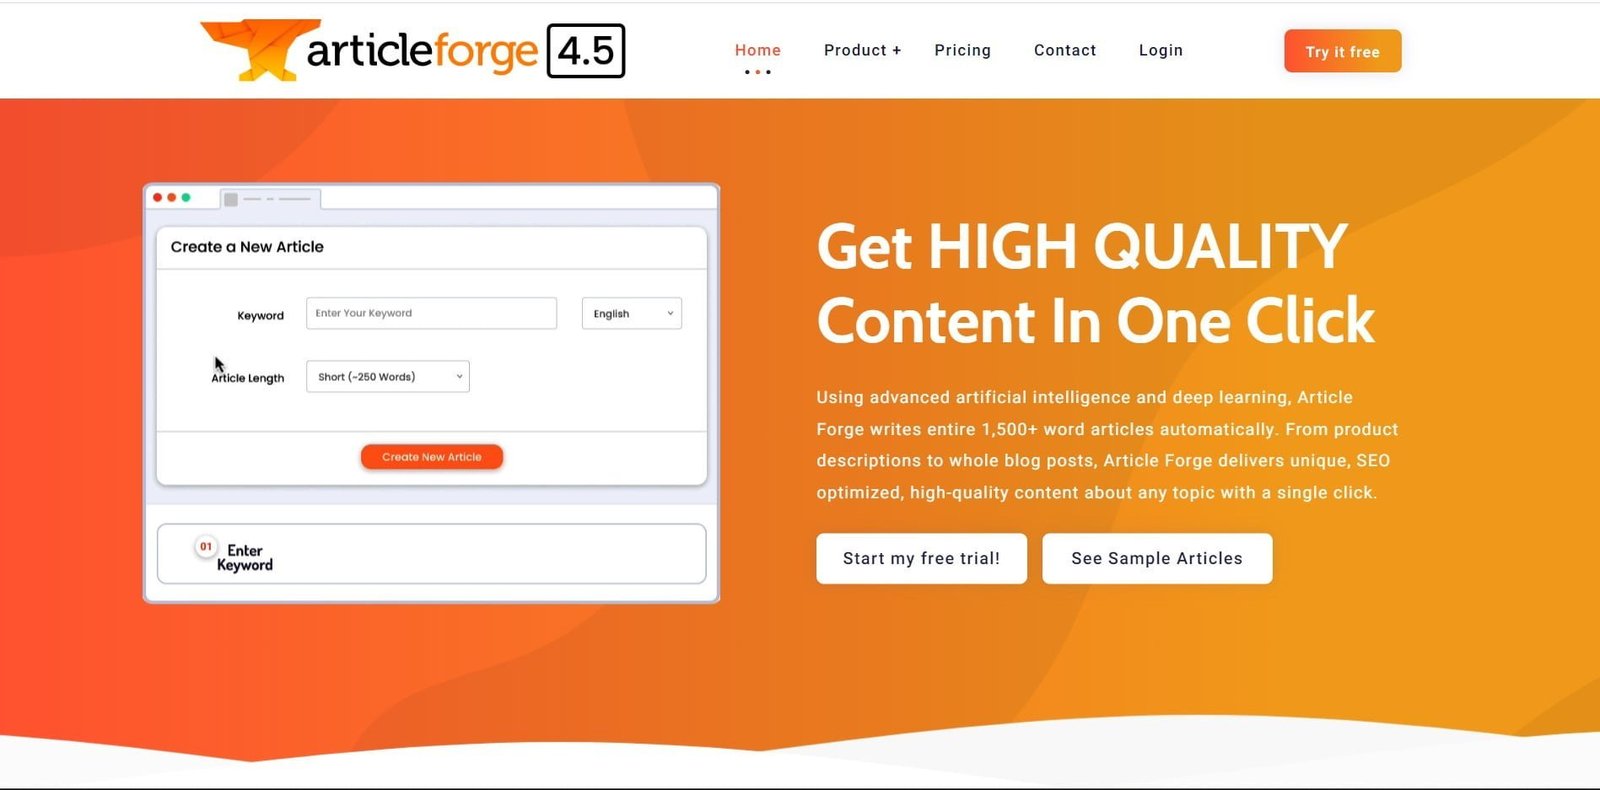 Article Forge is an AI writing and content generator tool to create high-quality